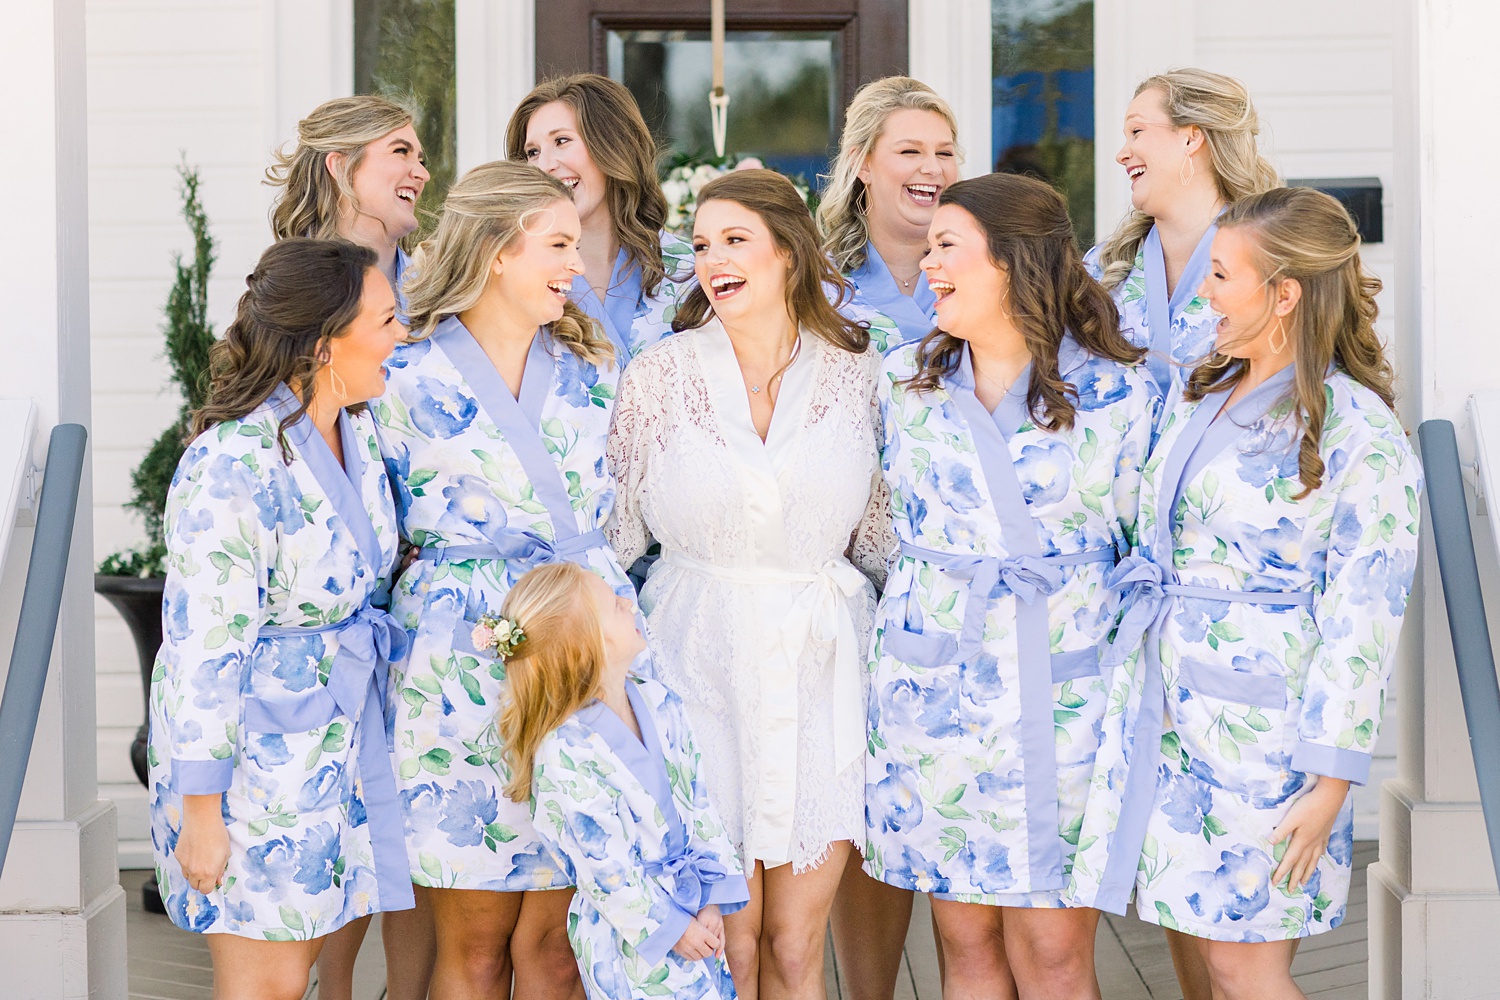 bride and bridesmaids in blue robes laugh during wedding morning